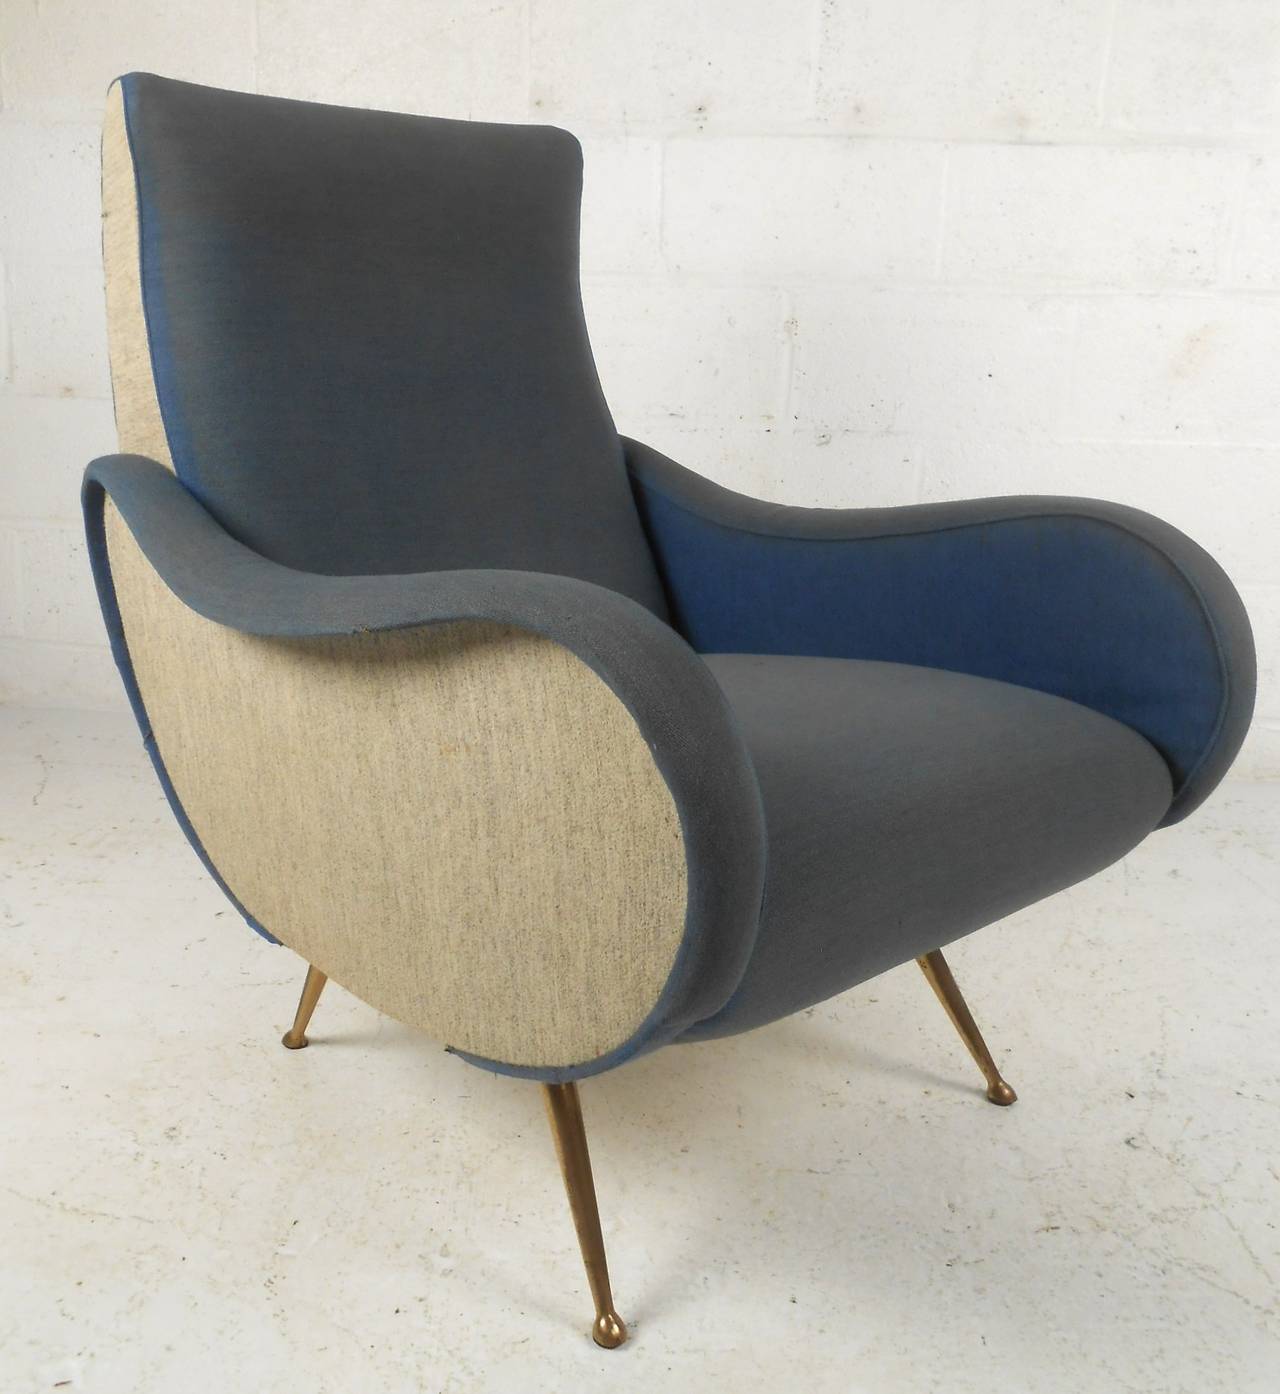 Mid-20th Century Pair of Mid-Century Modern Italian Chairs in the Style of Marco Zanuso